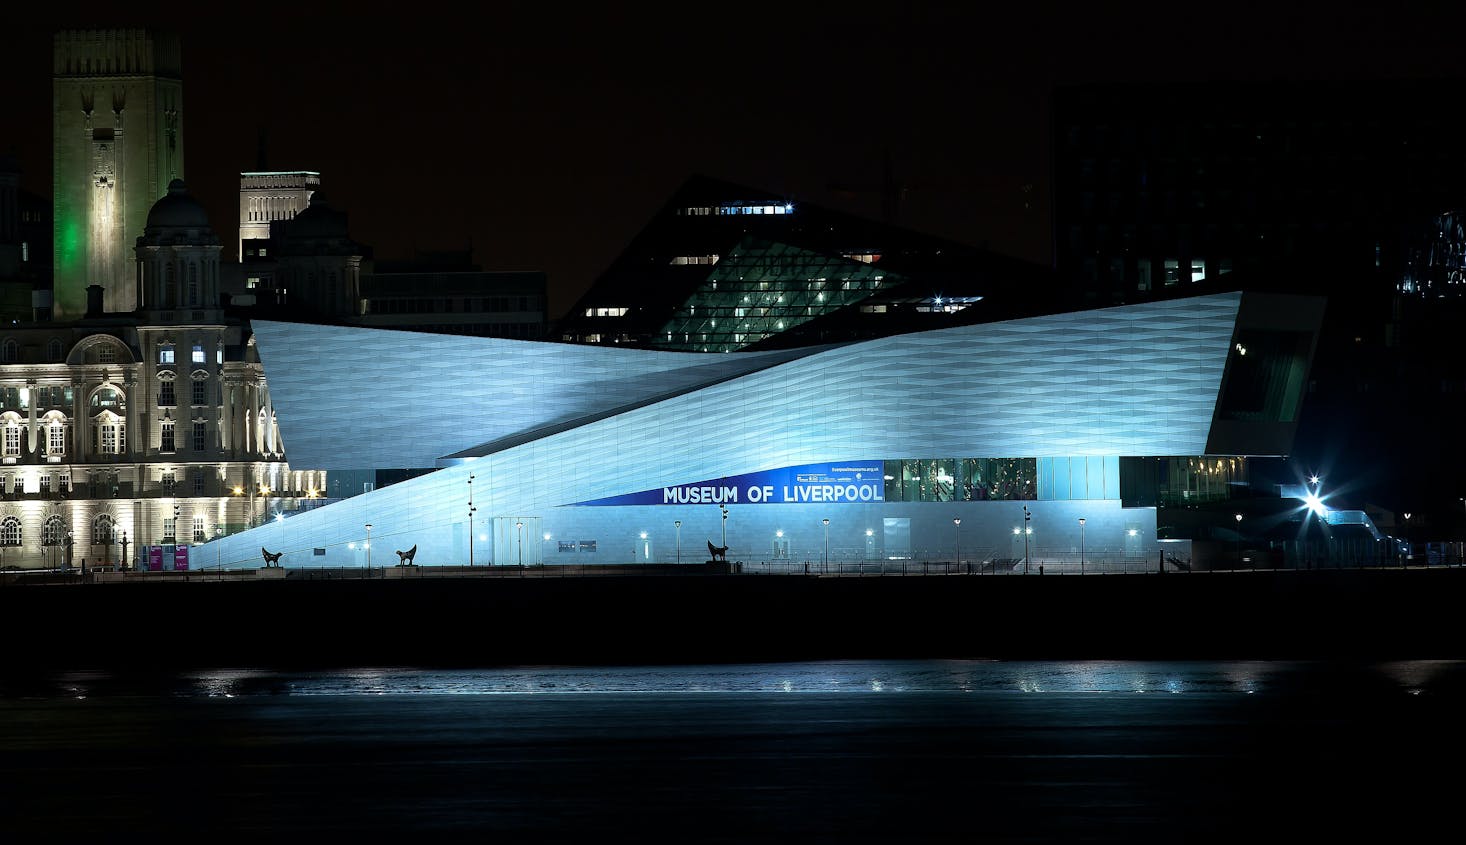 Museum of Liverpool at night